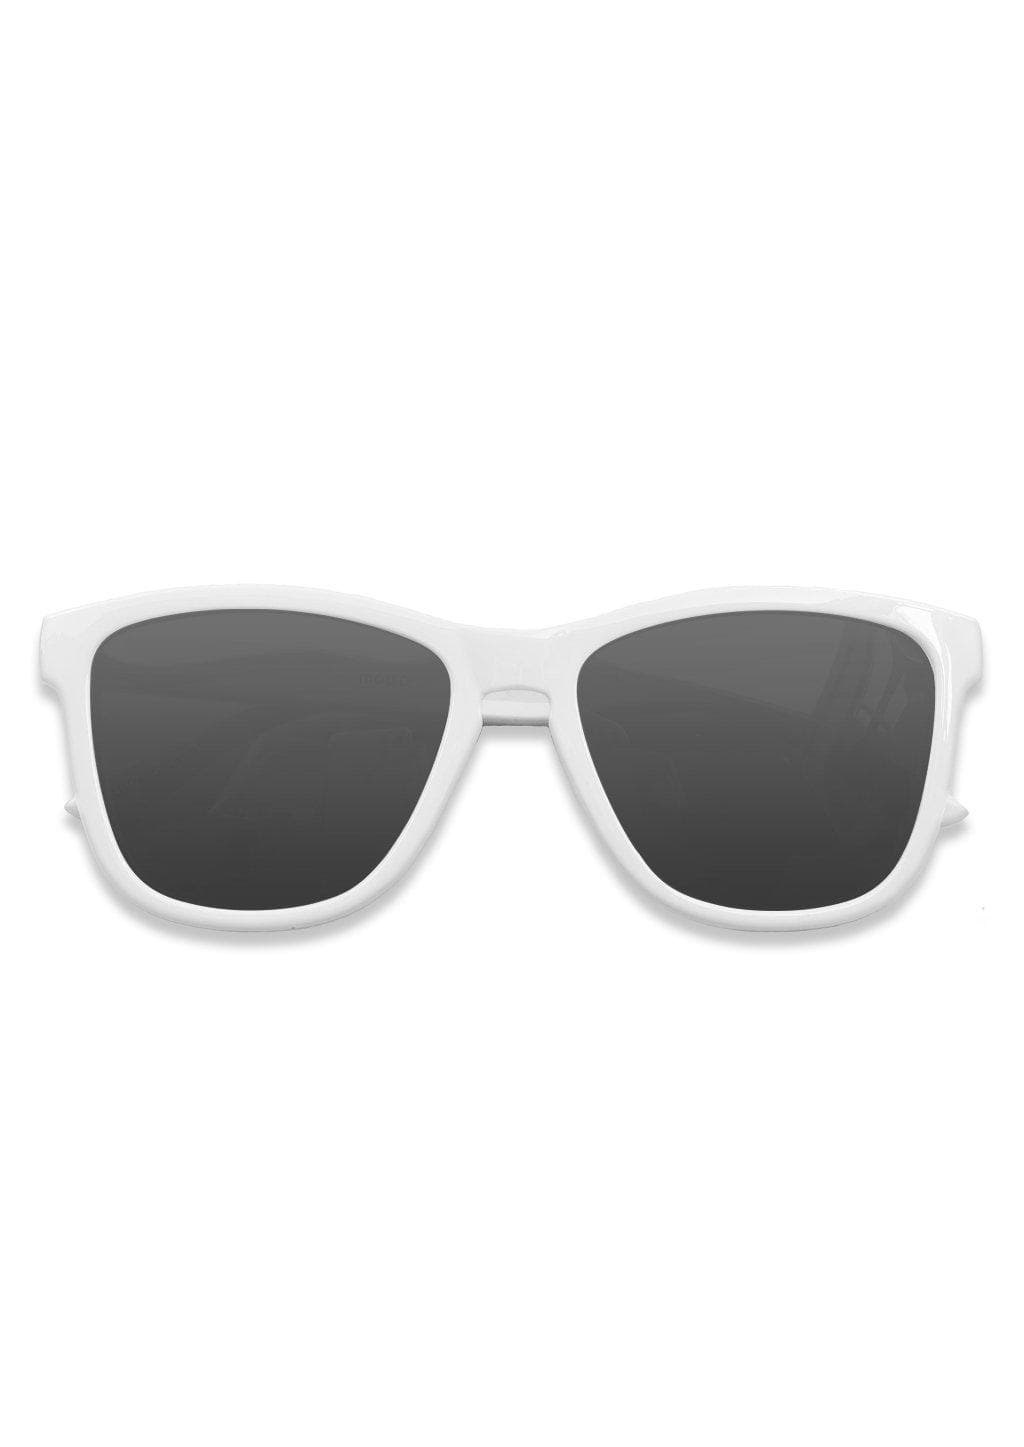 Our Mood V2 is an improved version of our last wayfarers. Plastic body for great quality and durabilty. This is Ace with white frame and black lenses. From the front.